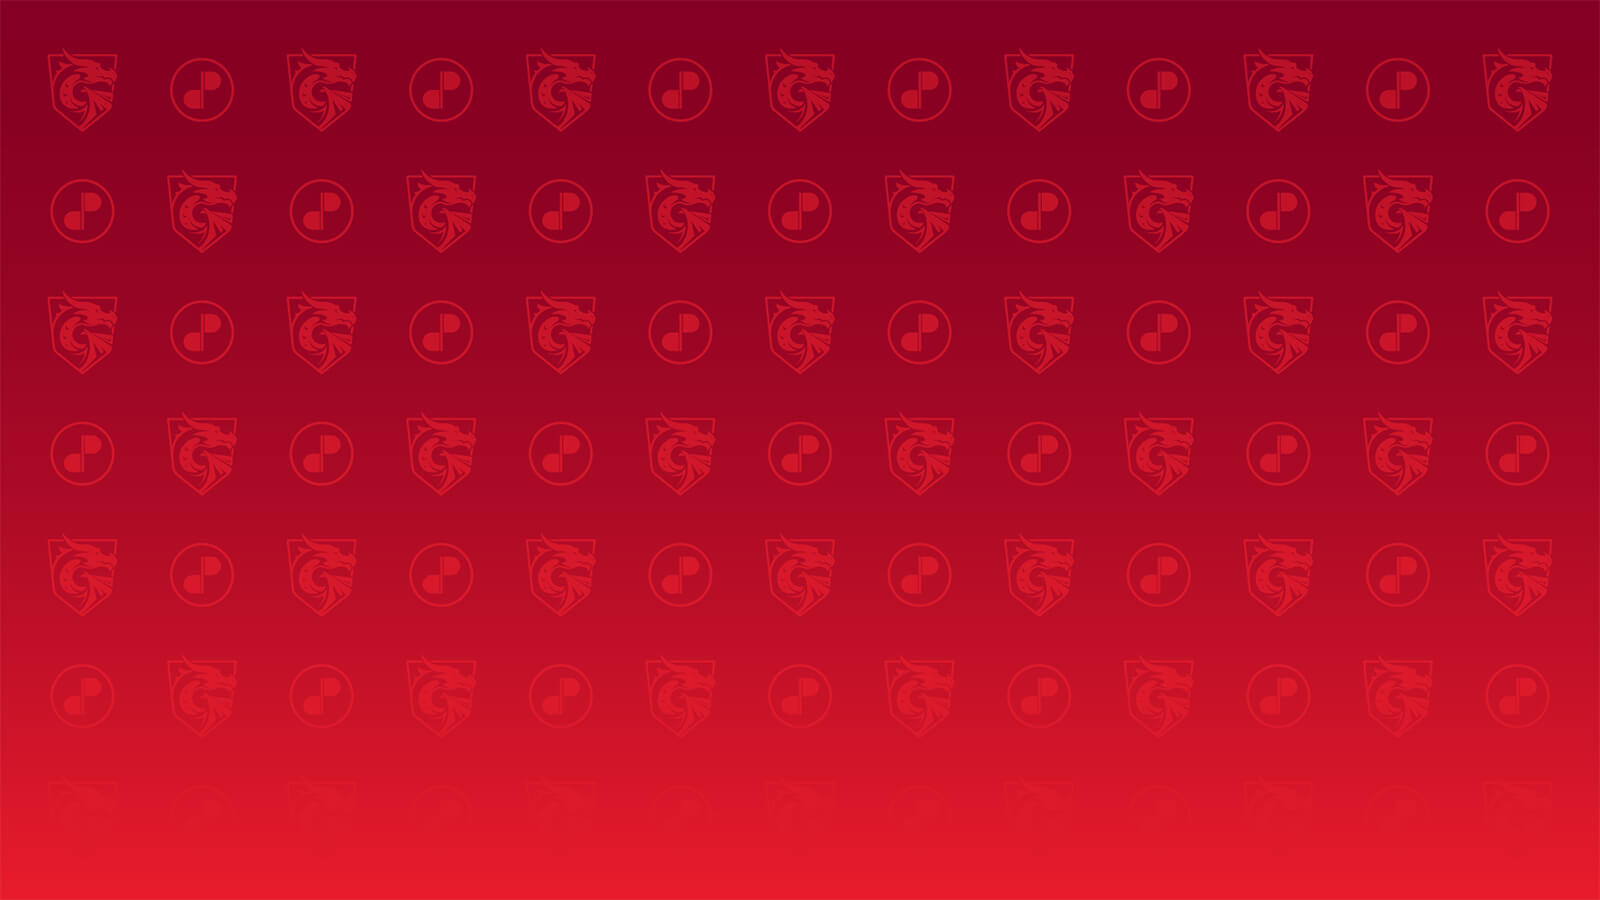 Alternating DigiPen icons and mascots on red background